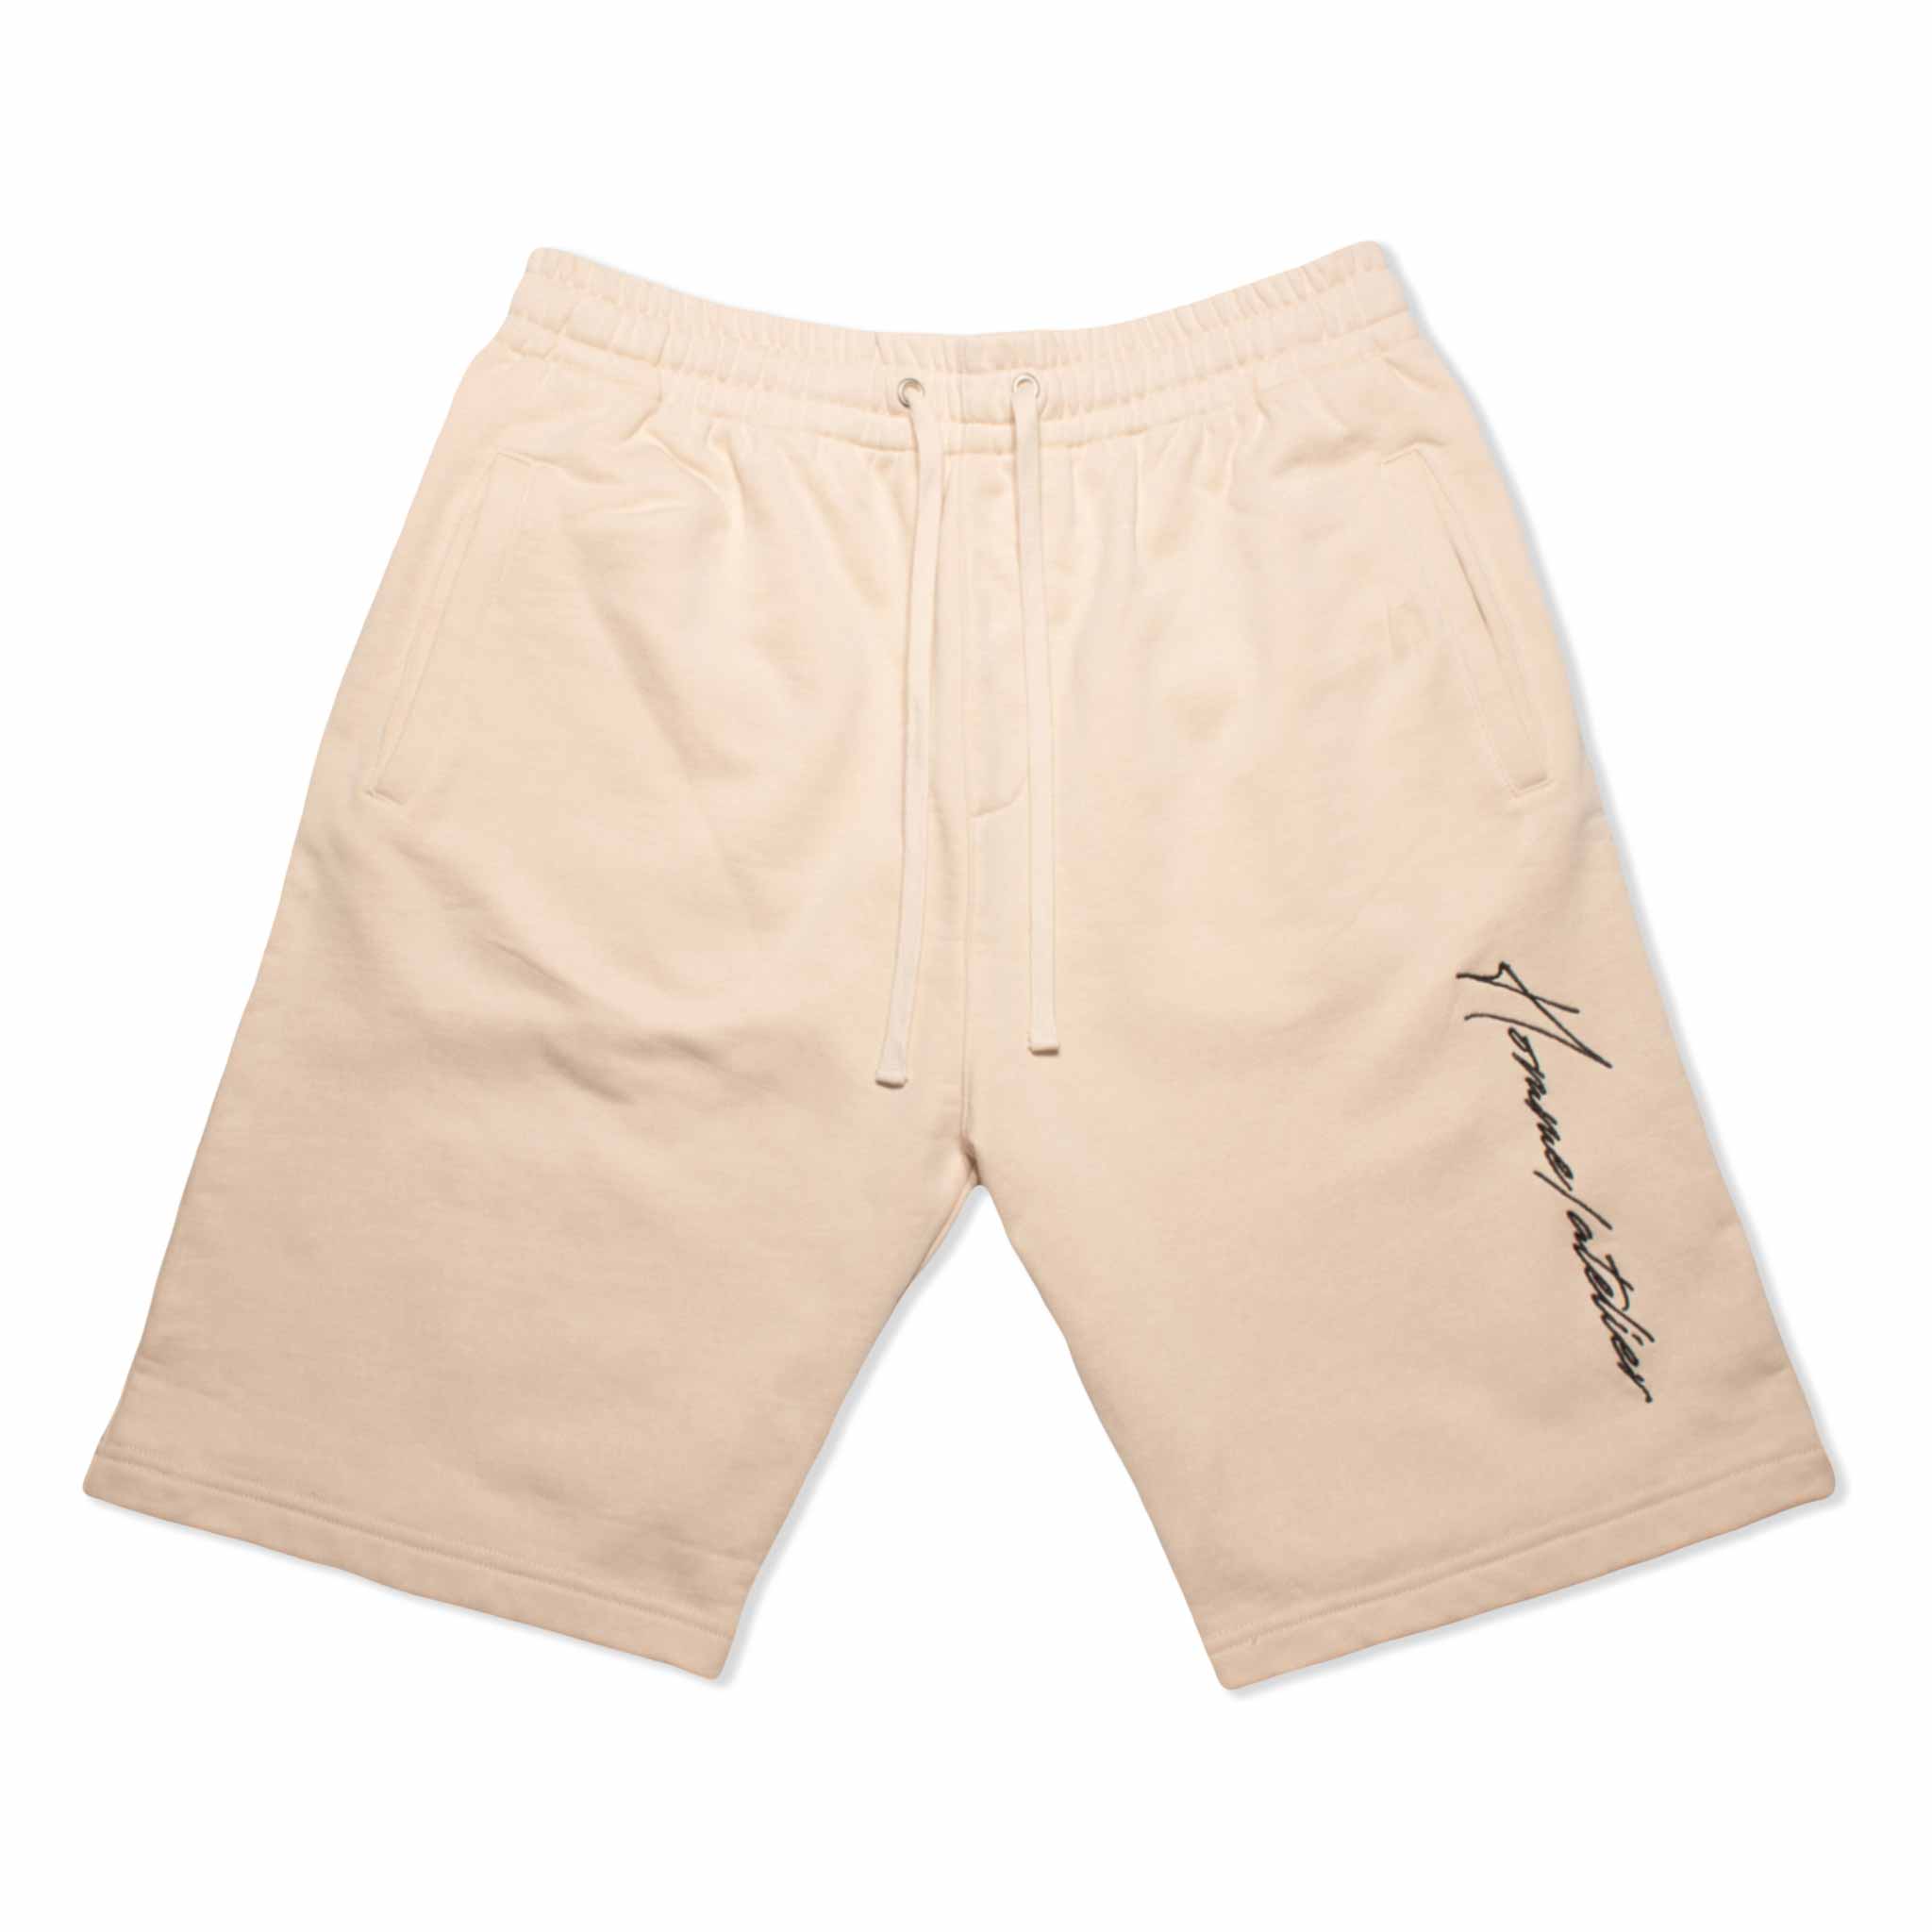 HOMME+ Atelier Embroidery Shorts Light Beige